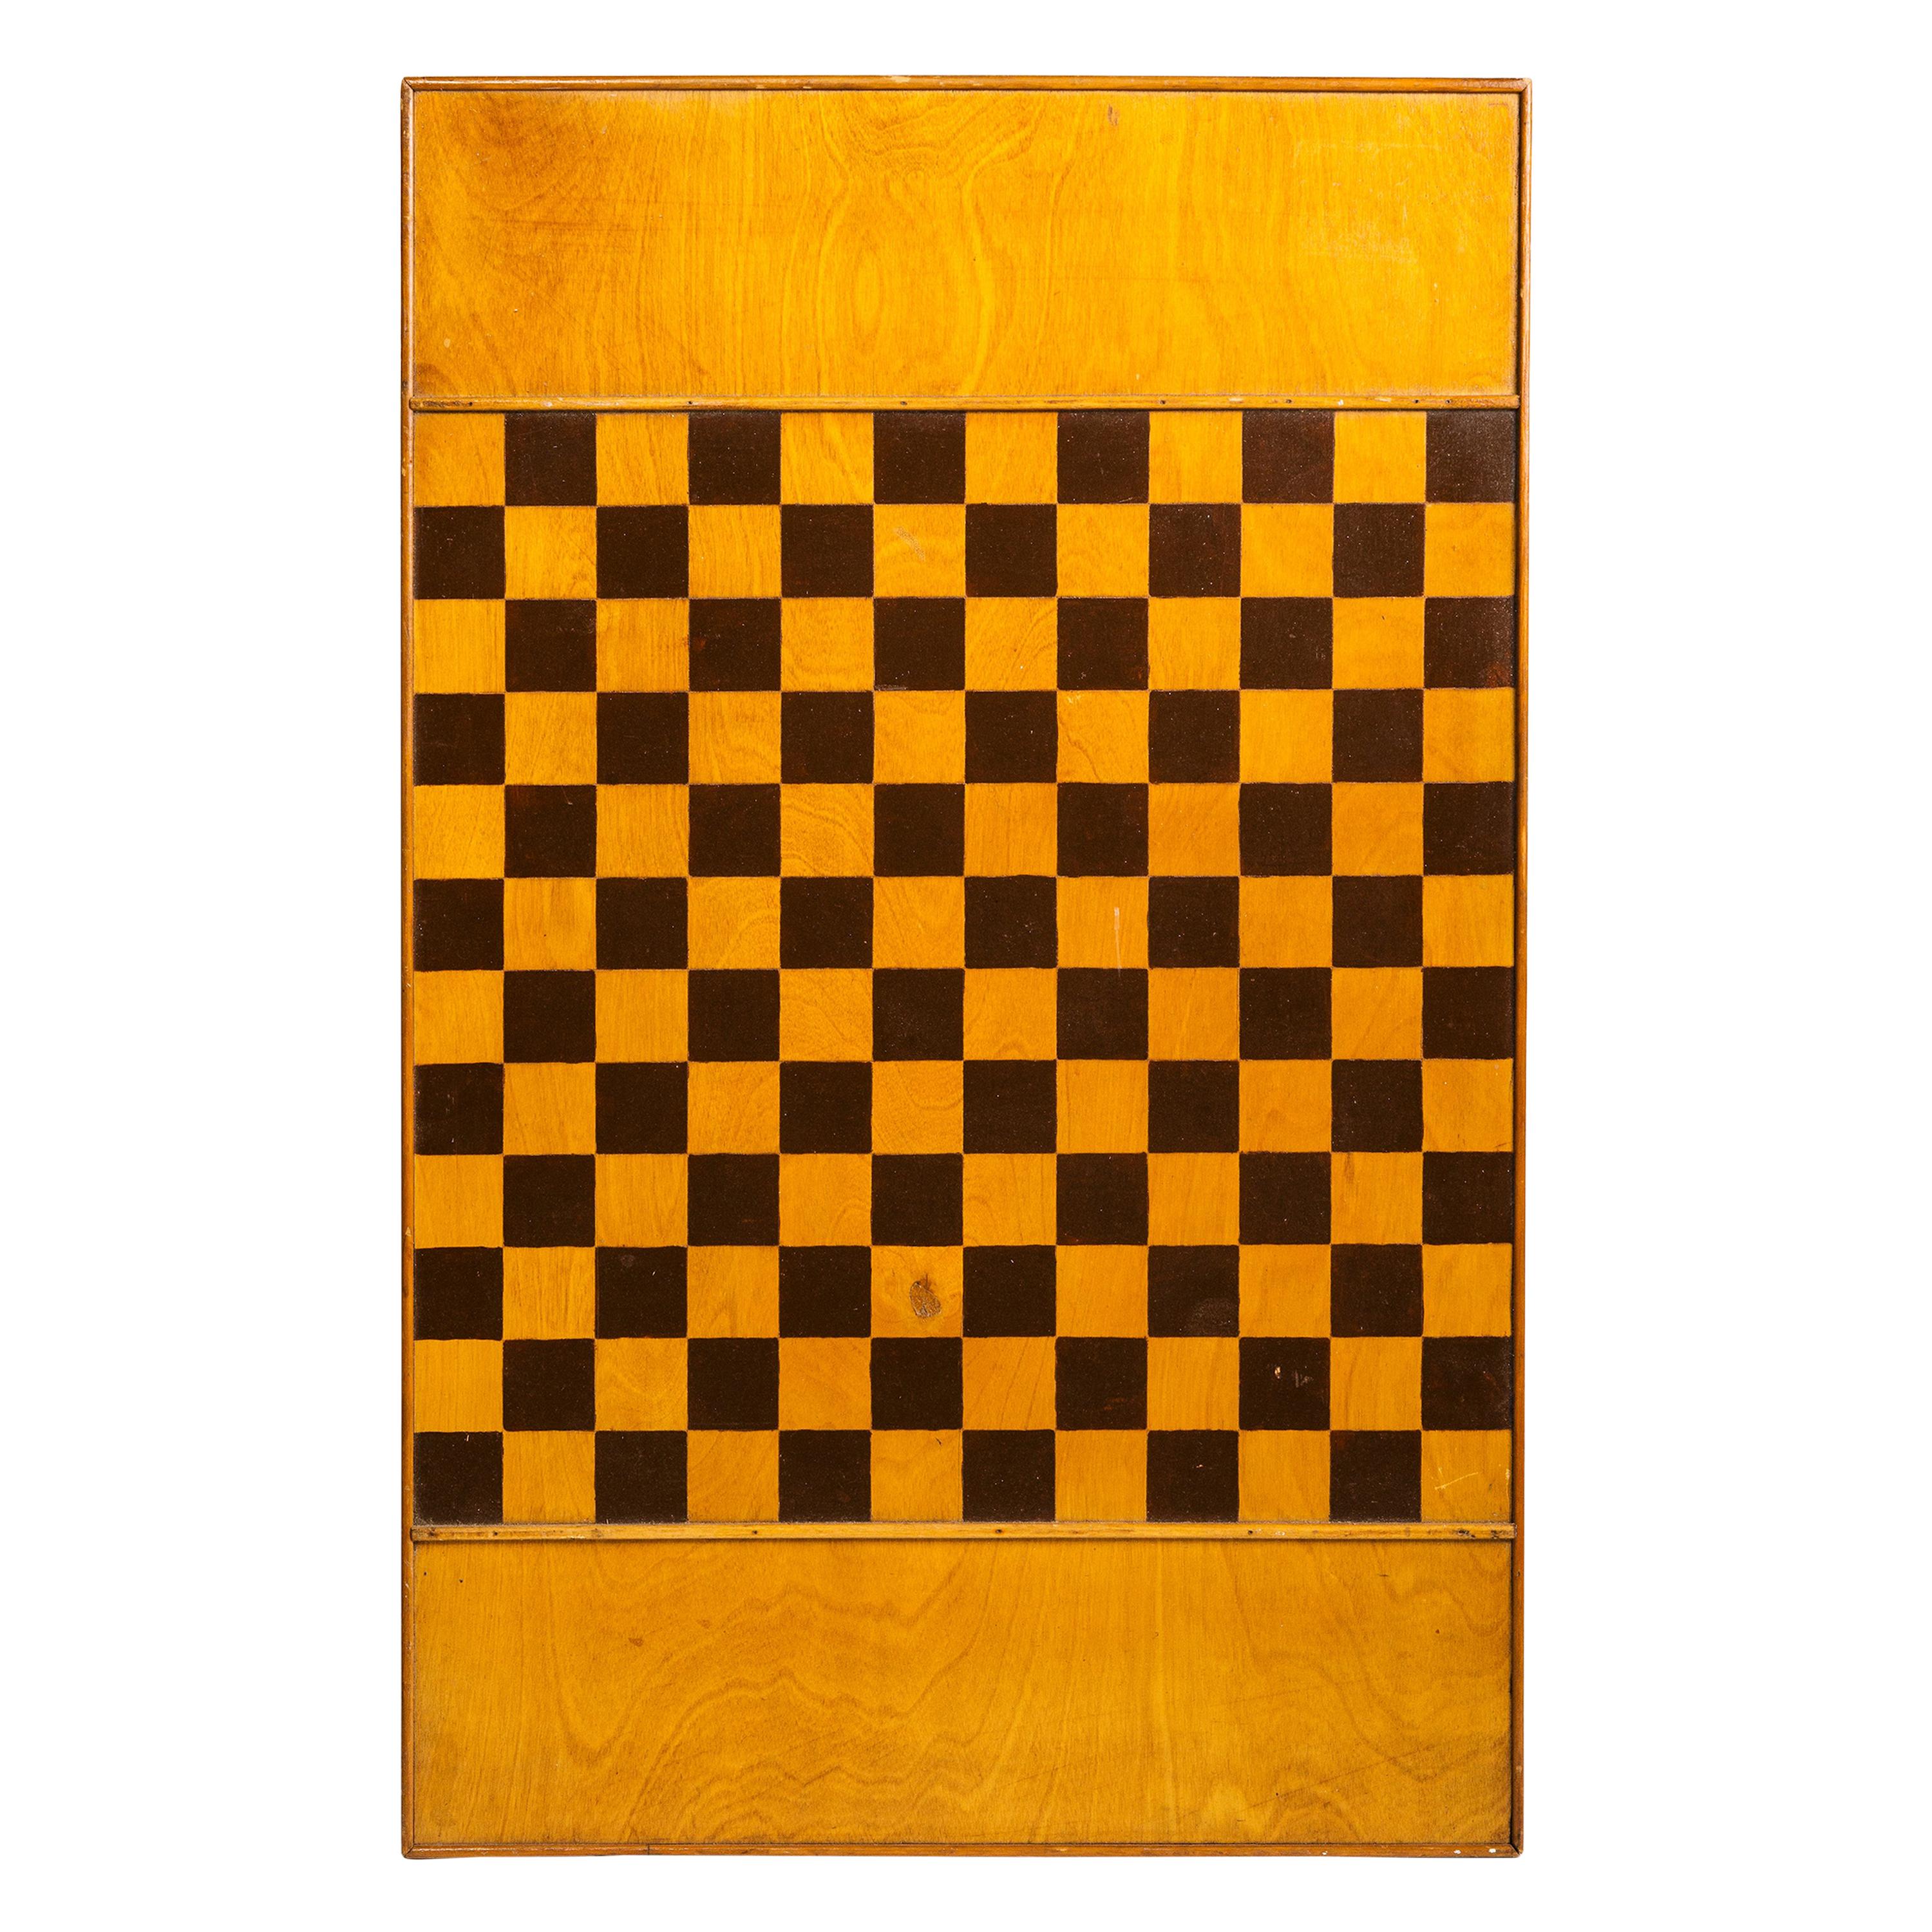 American Game Board For Sale